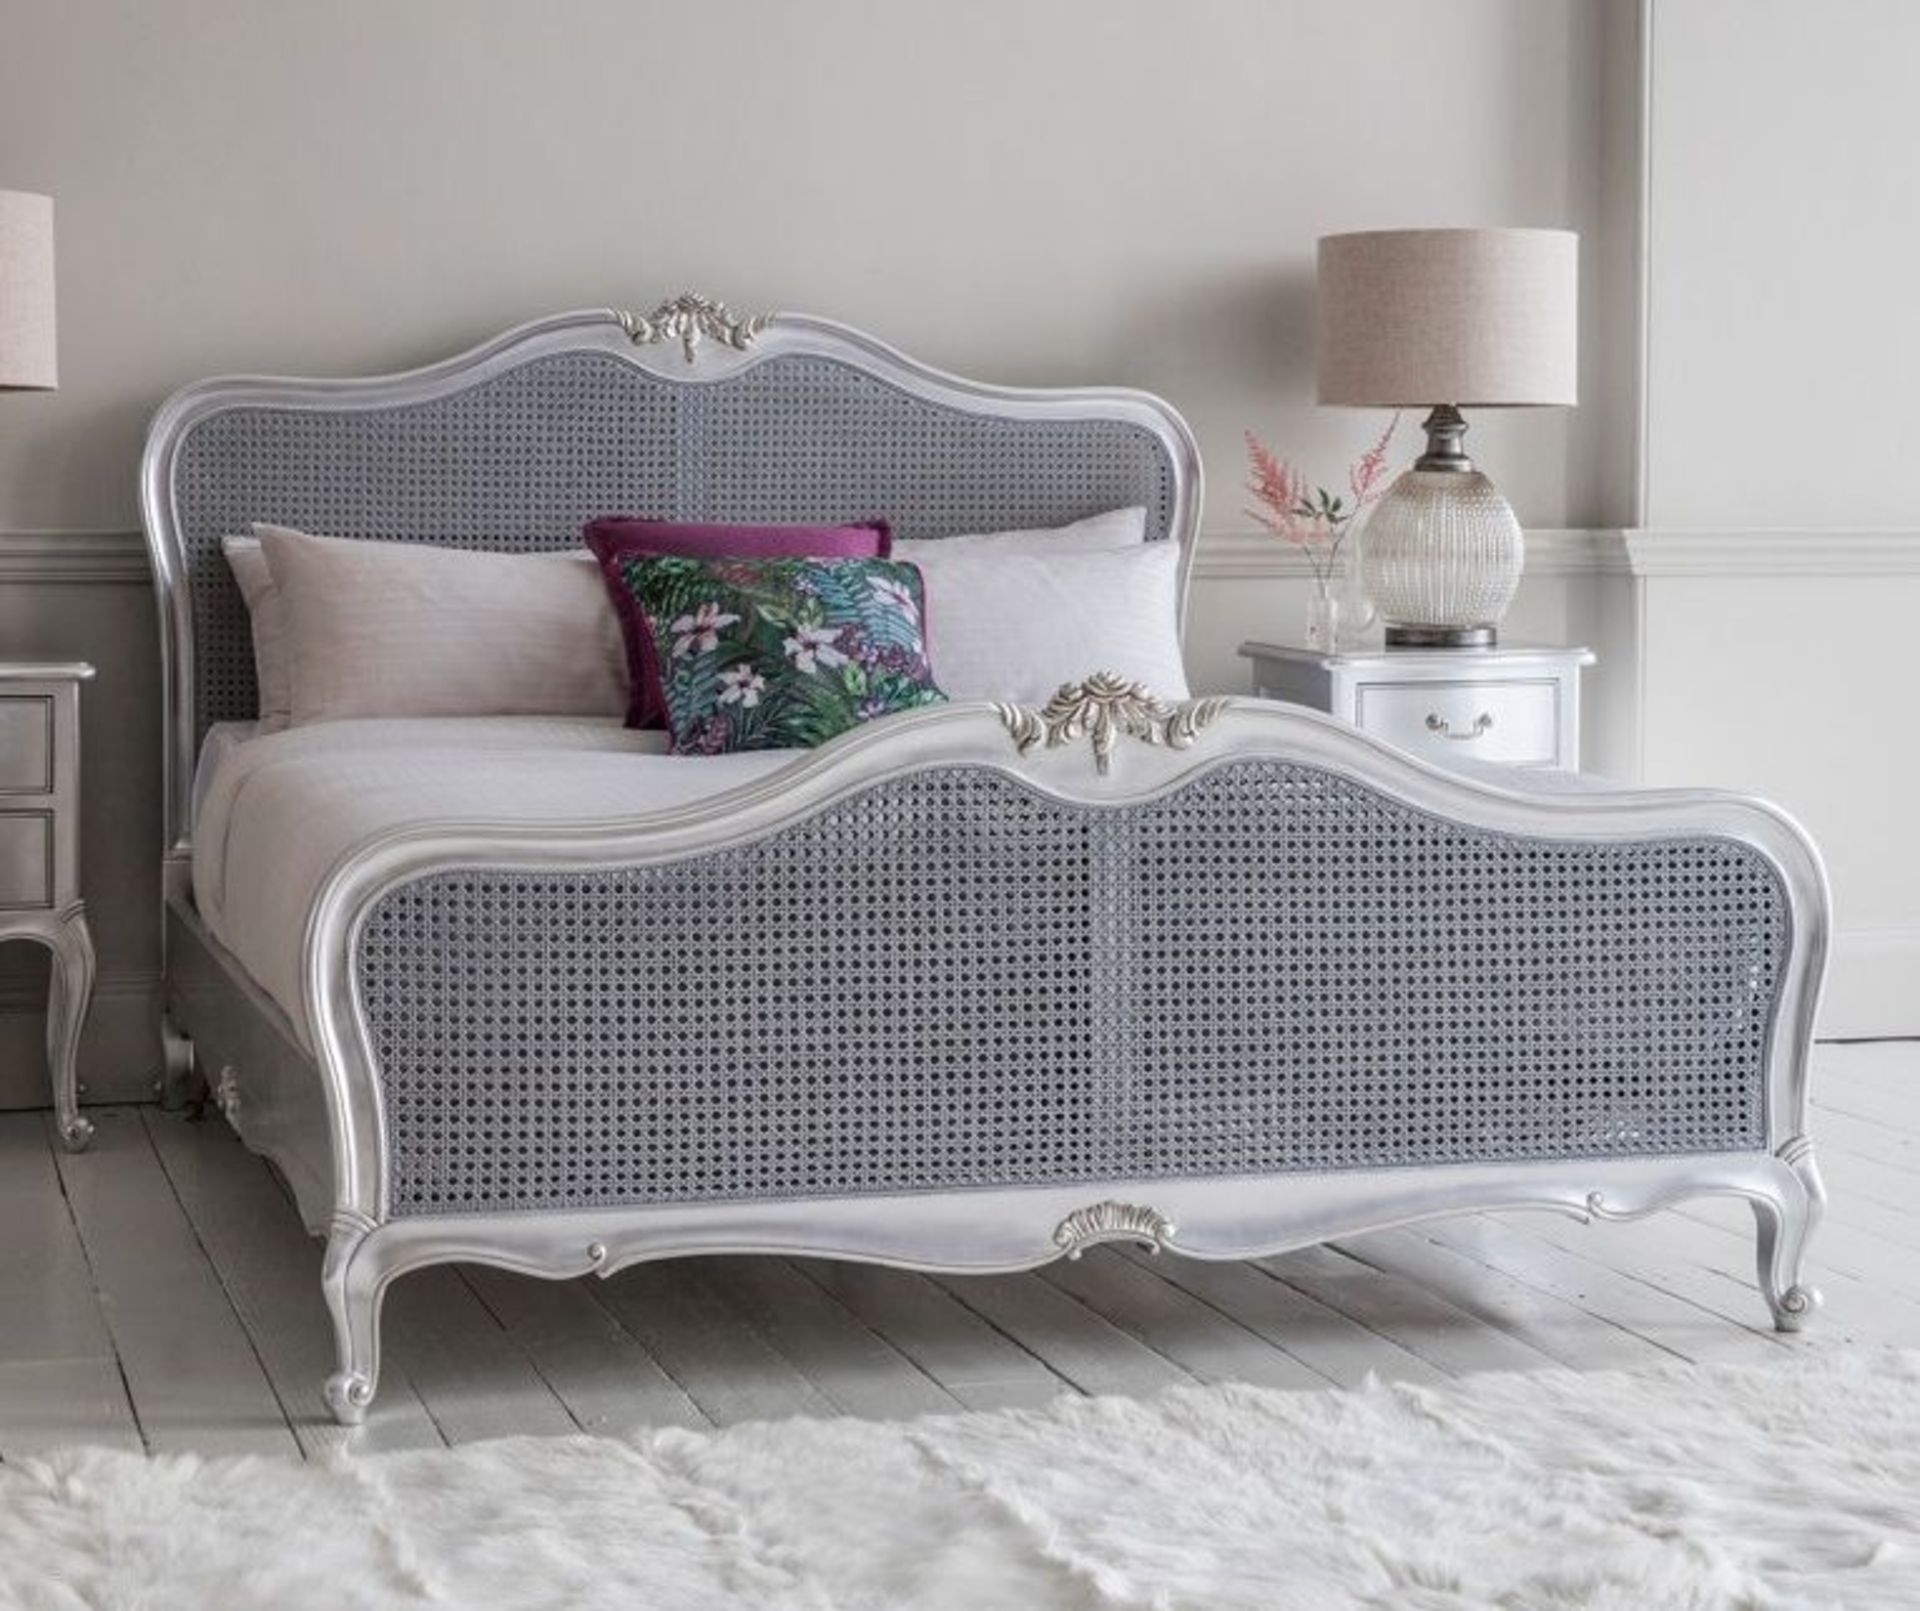 Hudson Cane 6' Superking Size Cane Bed Silver White Mindy Ash, Painted Silver Highlight Finish, Hand